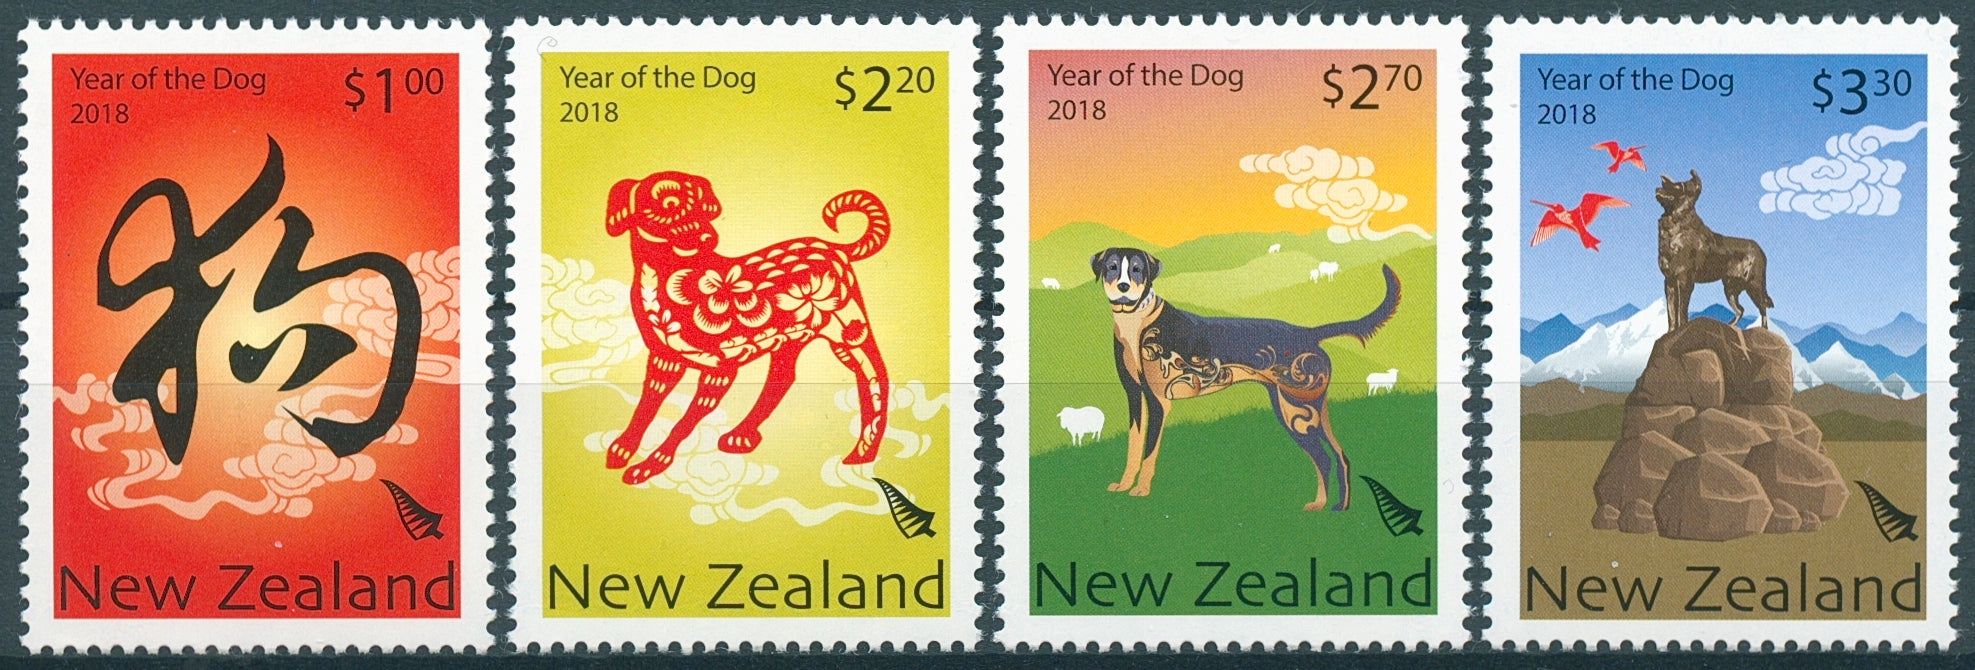 New Zealand NZ 2018 MNH Year of Dog 4v Set Dogs Chinese Lunar New Year Stamps